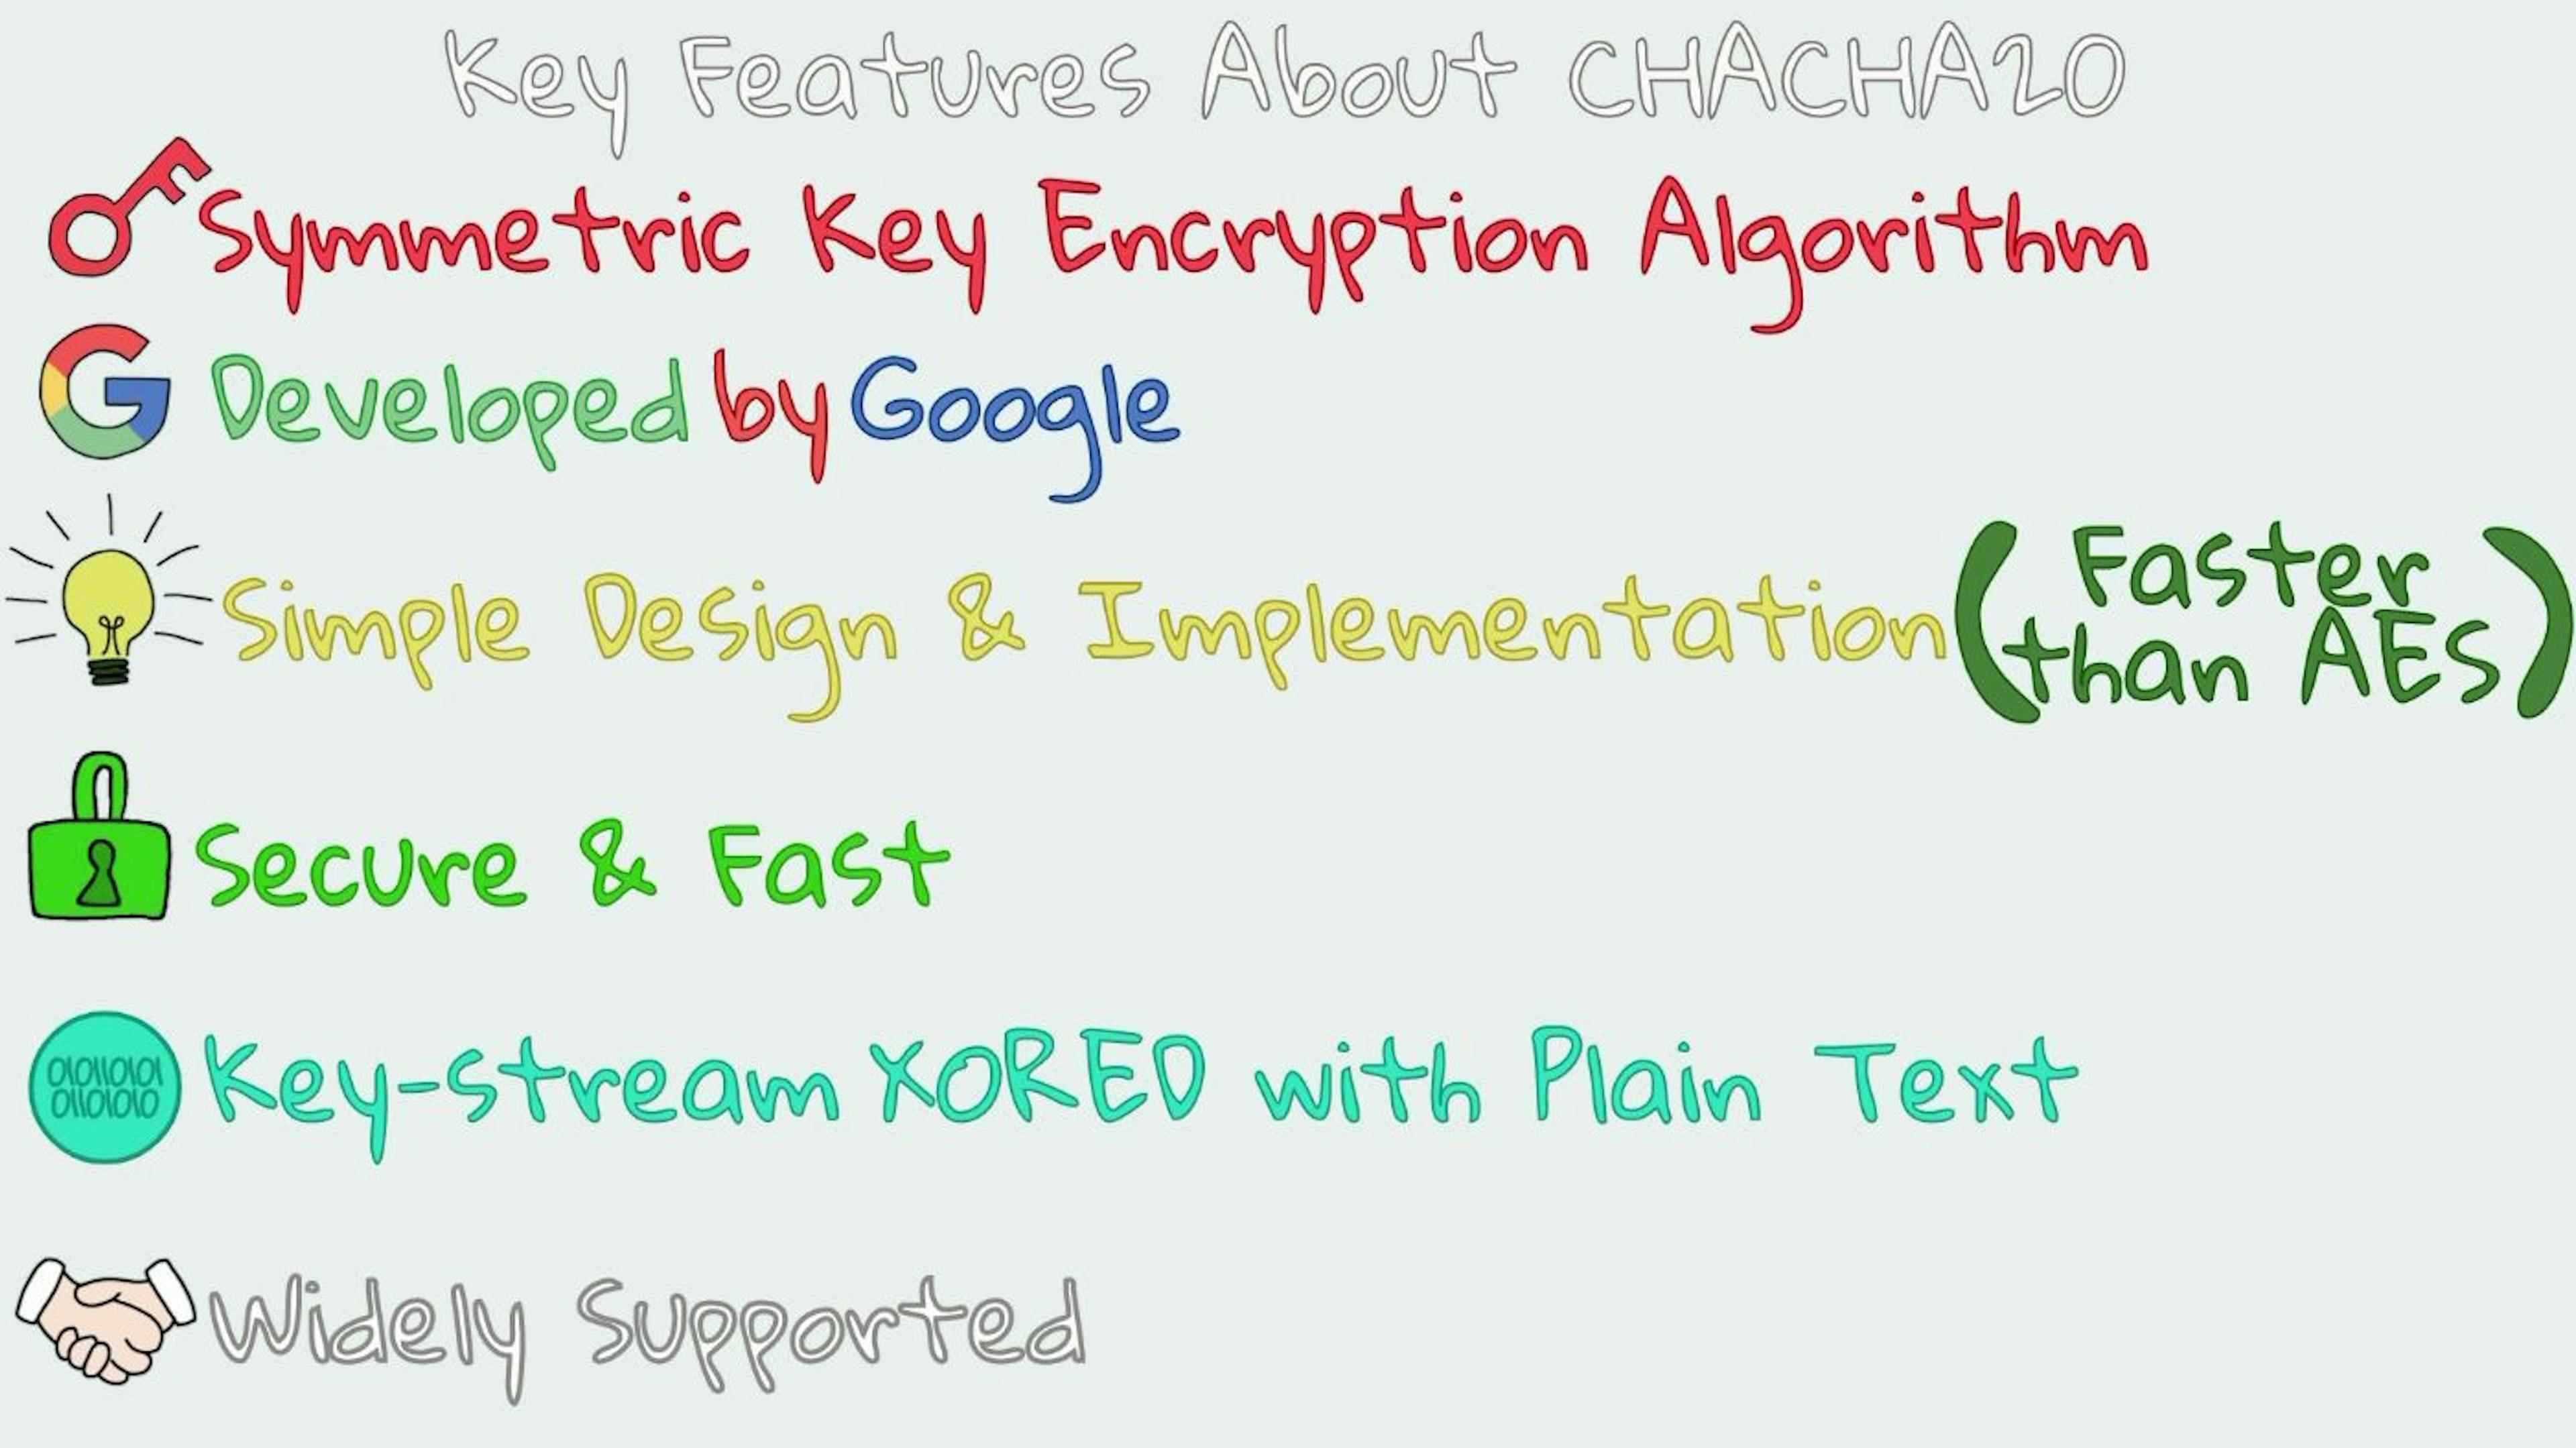 Key features about ChaCha20